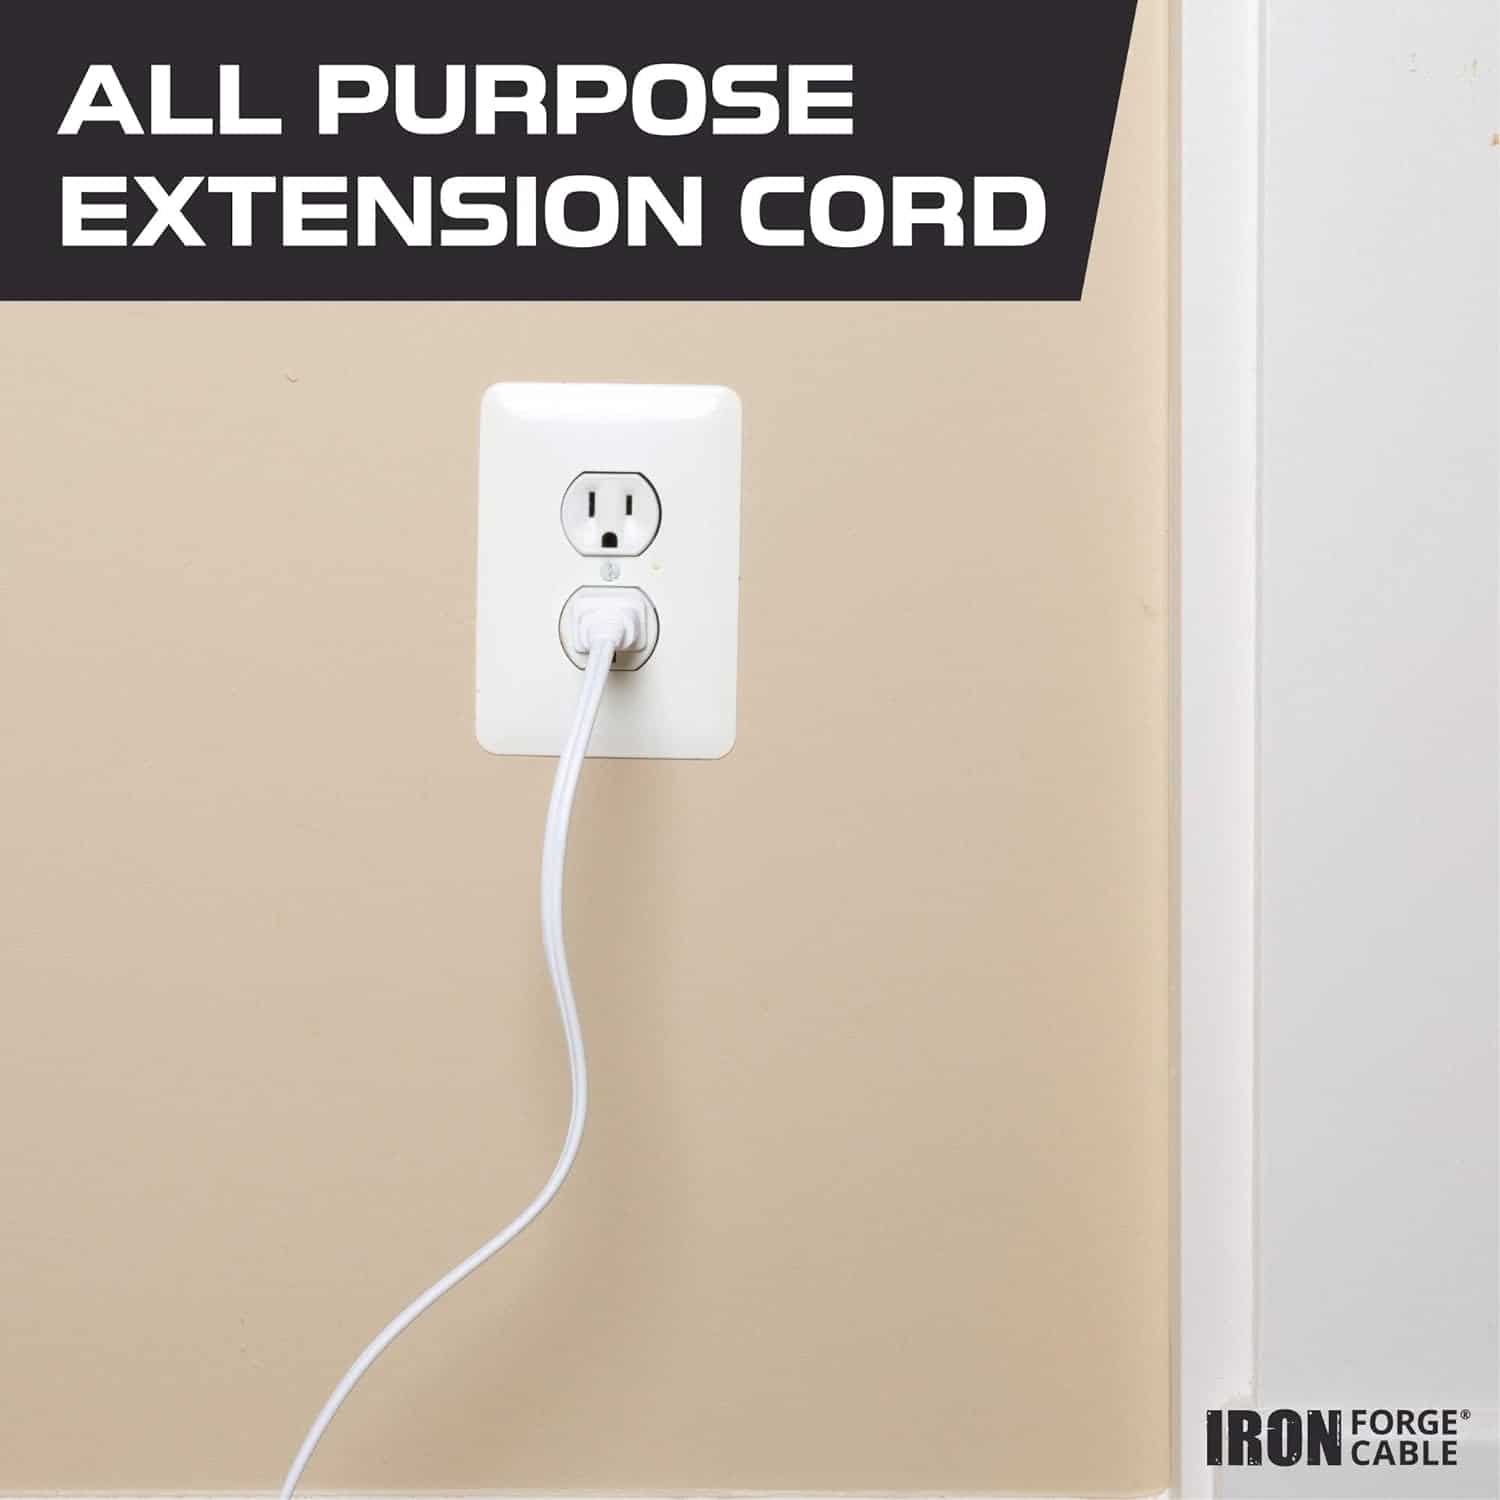 Iron Forge Cable White Extension Cord 3 Pack,10ft 15ft & 20ft, 16 2 Indoor Extension Cord with Multiple Outlets 13 AMP 2 Prong Electrical Cable for Home Office Household Appliances 3